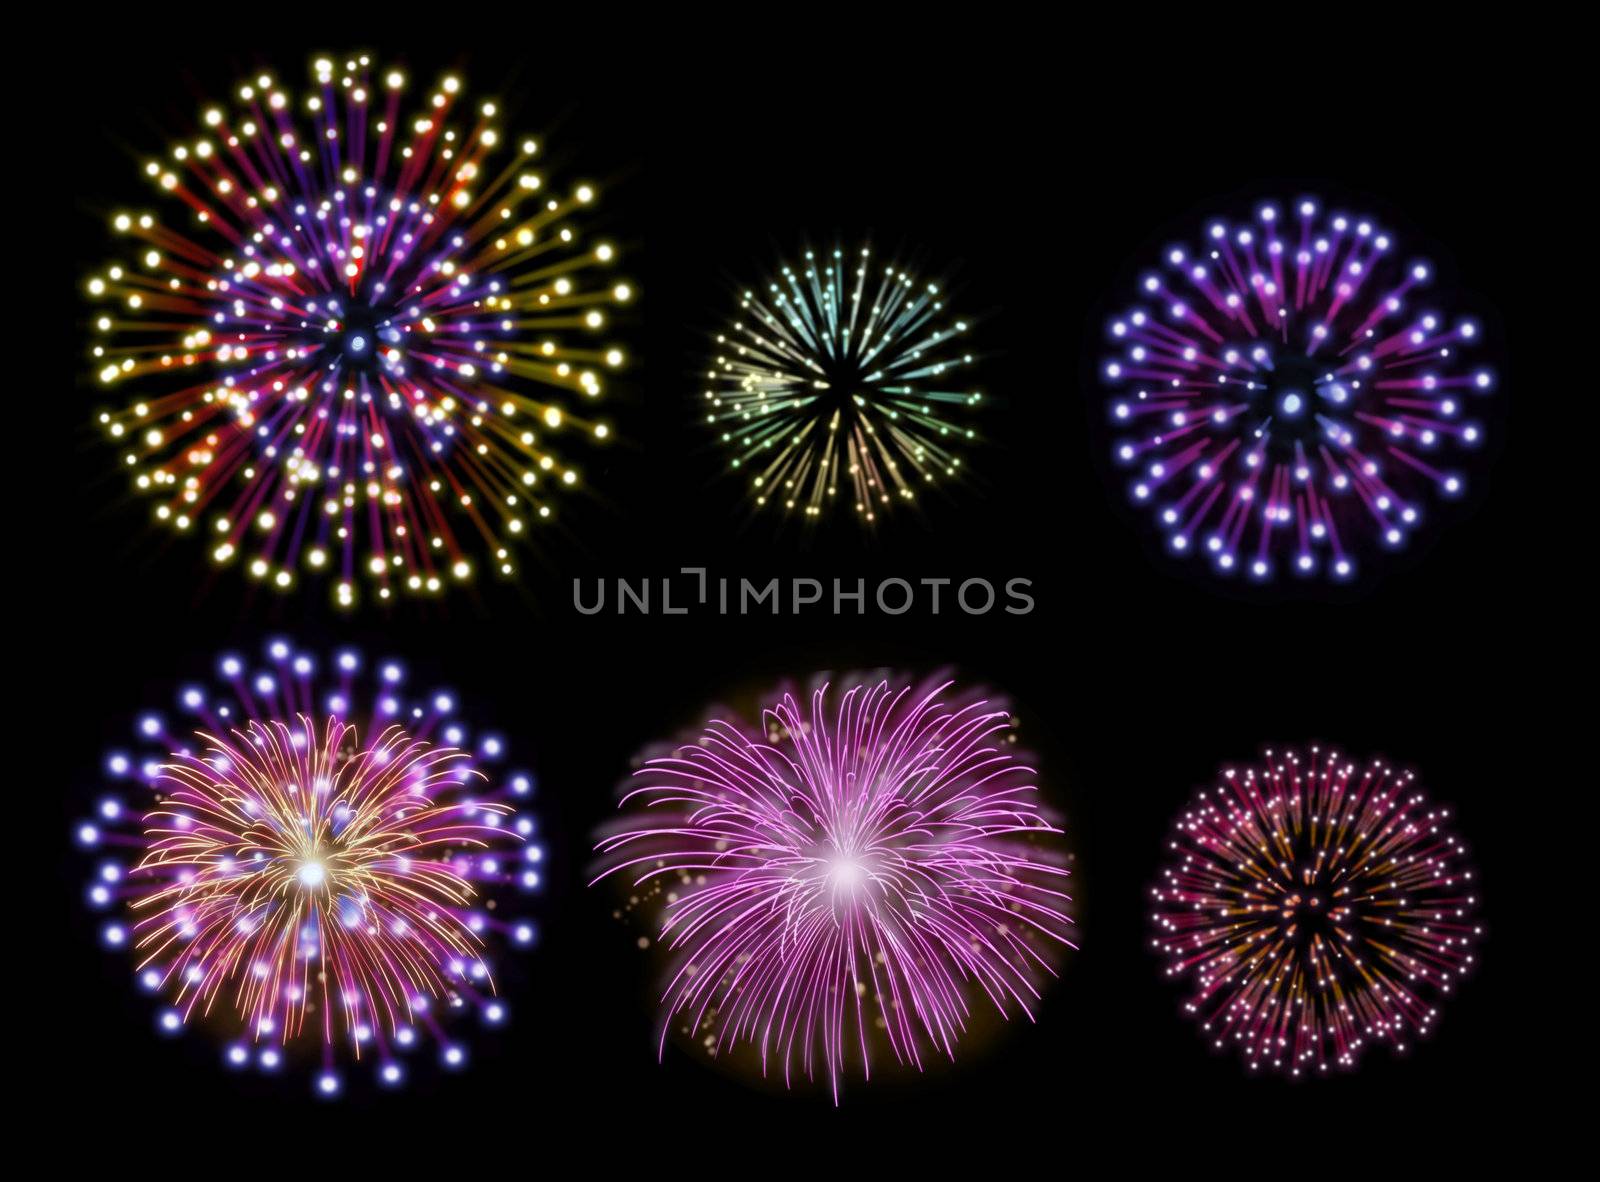 Collection of colorful fireworks, sparklers, salute and petards explosions. Design elements isolated over black background